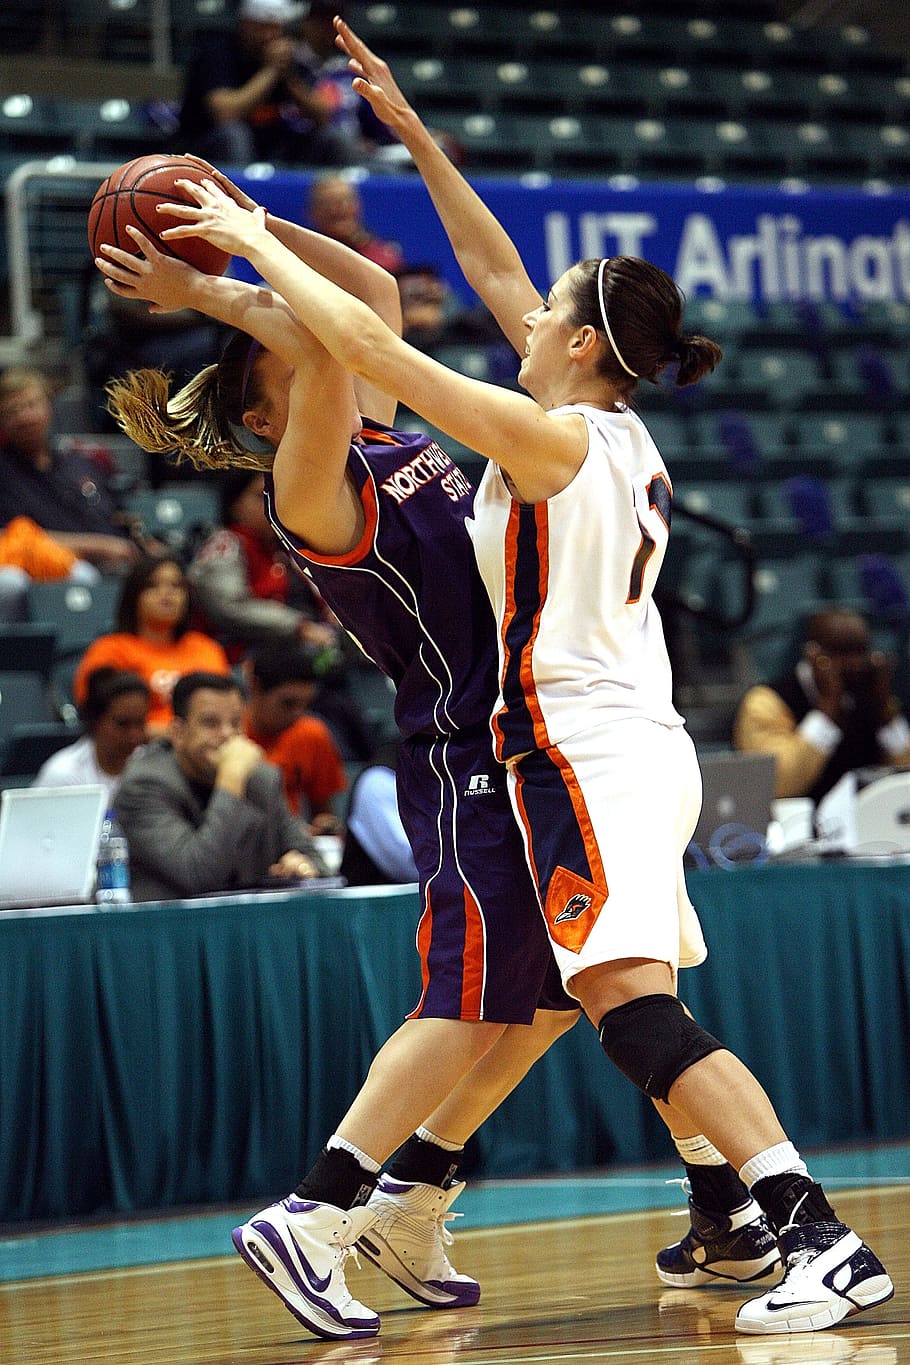 basketball, girls, conference, action, defense, sport, ball, active, player, female